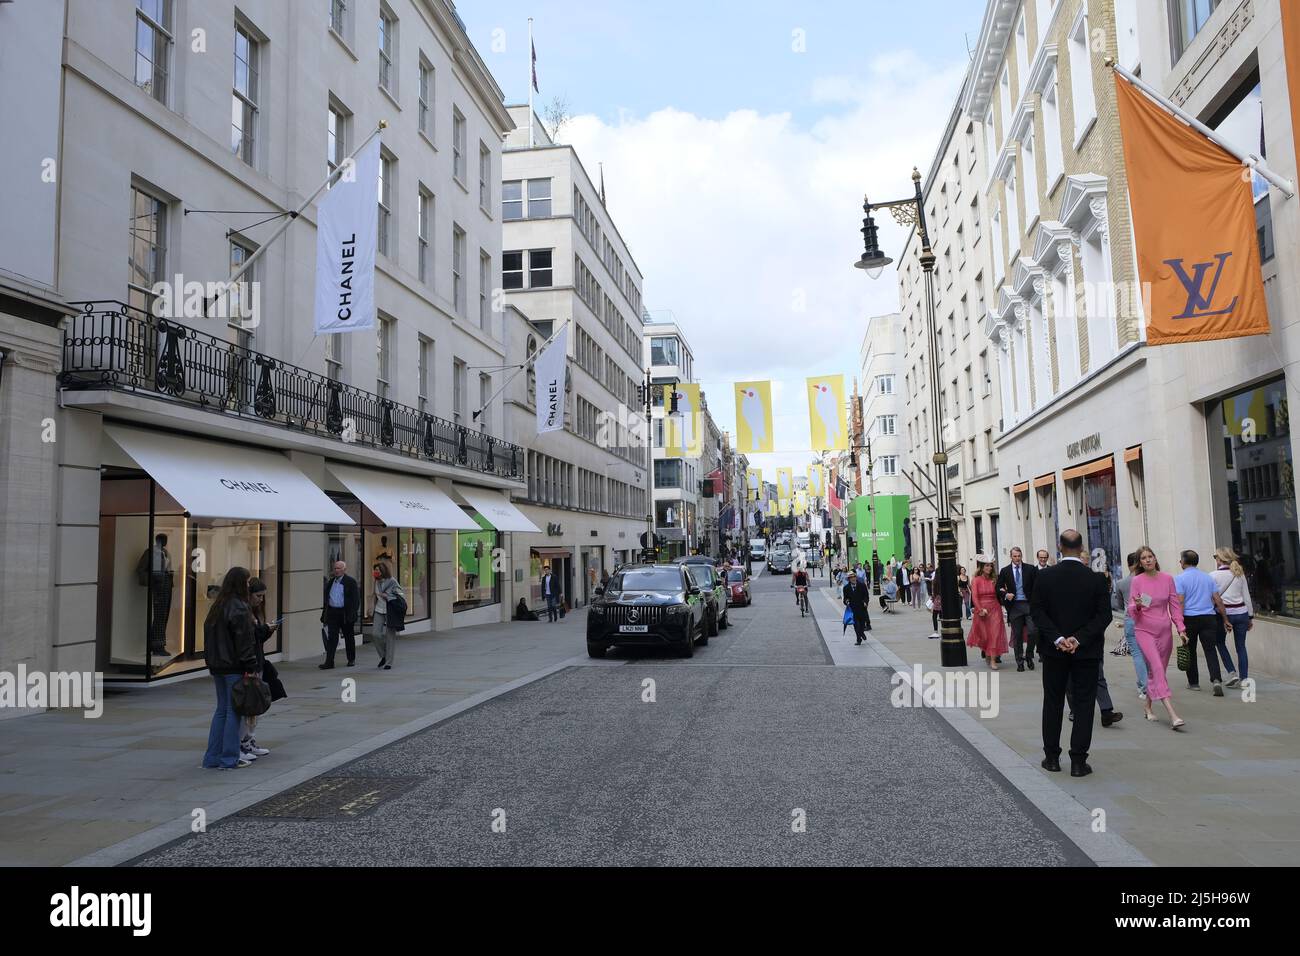 Bond street shop chanel hi-res stock photography and images - Alamy